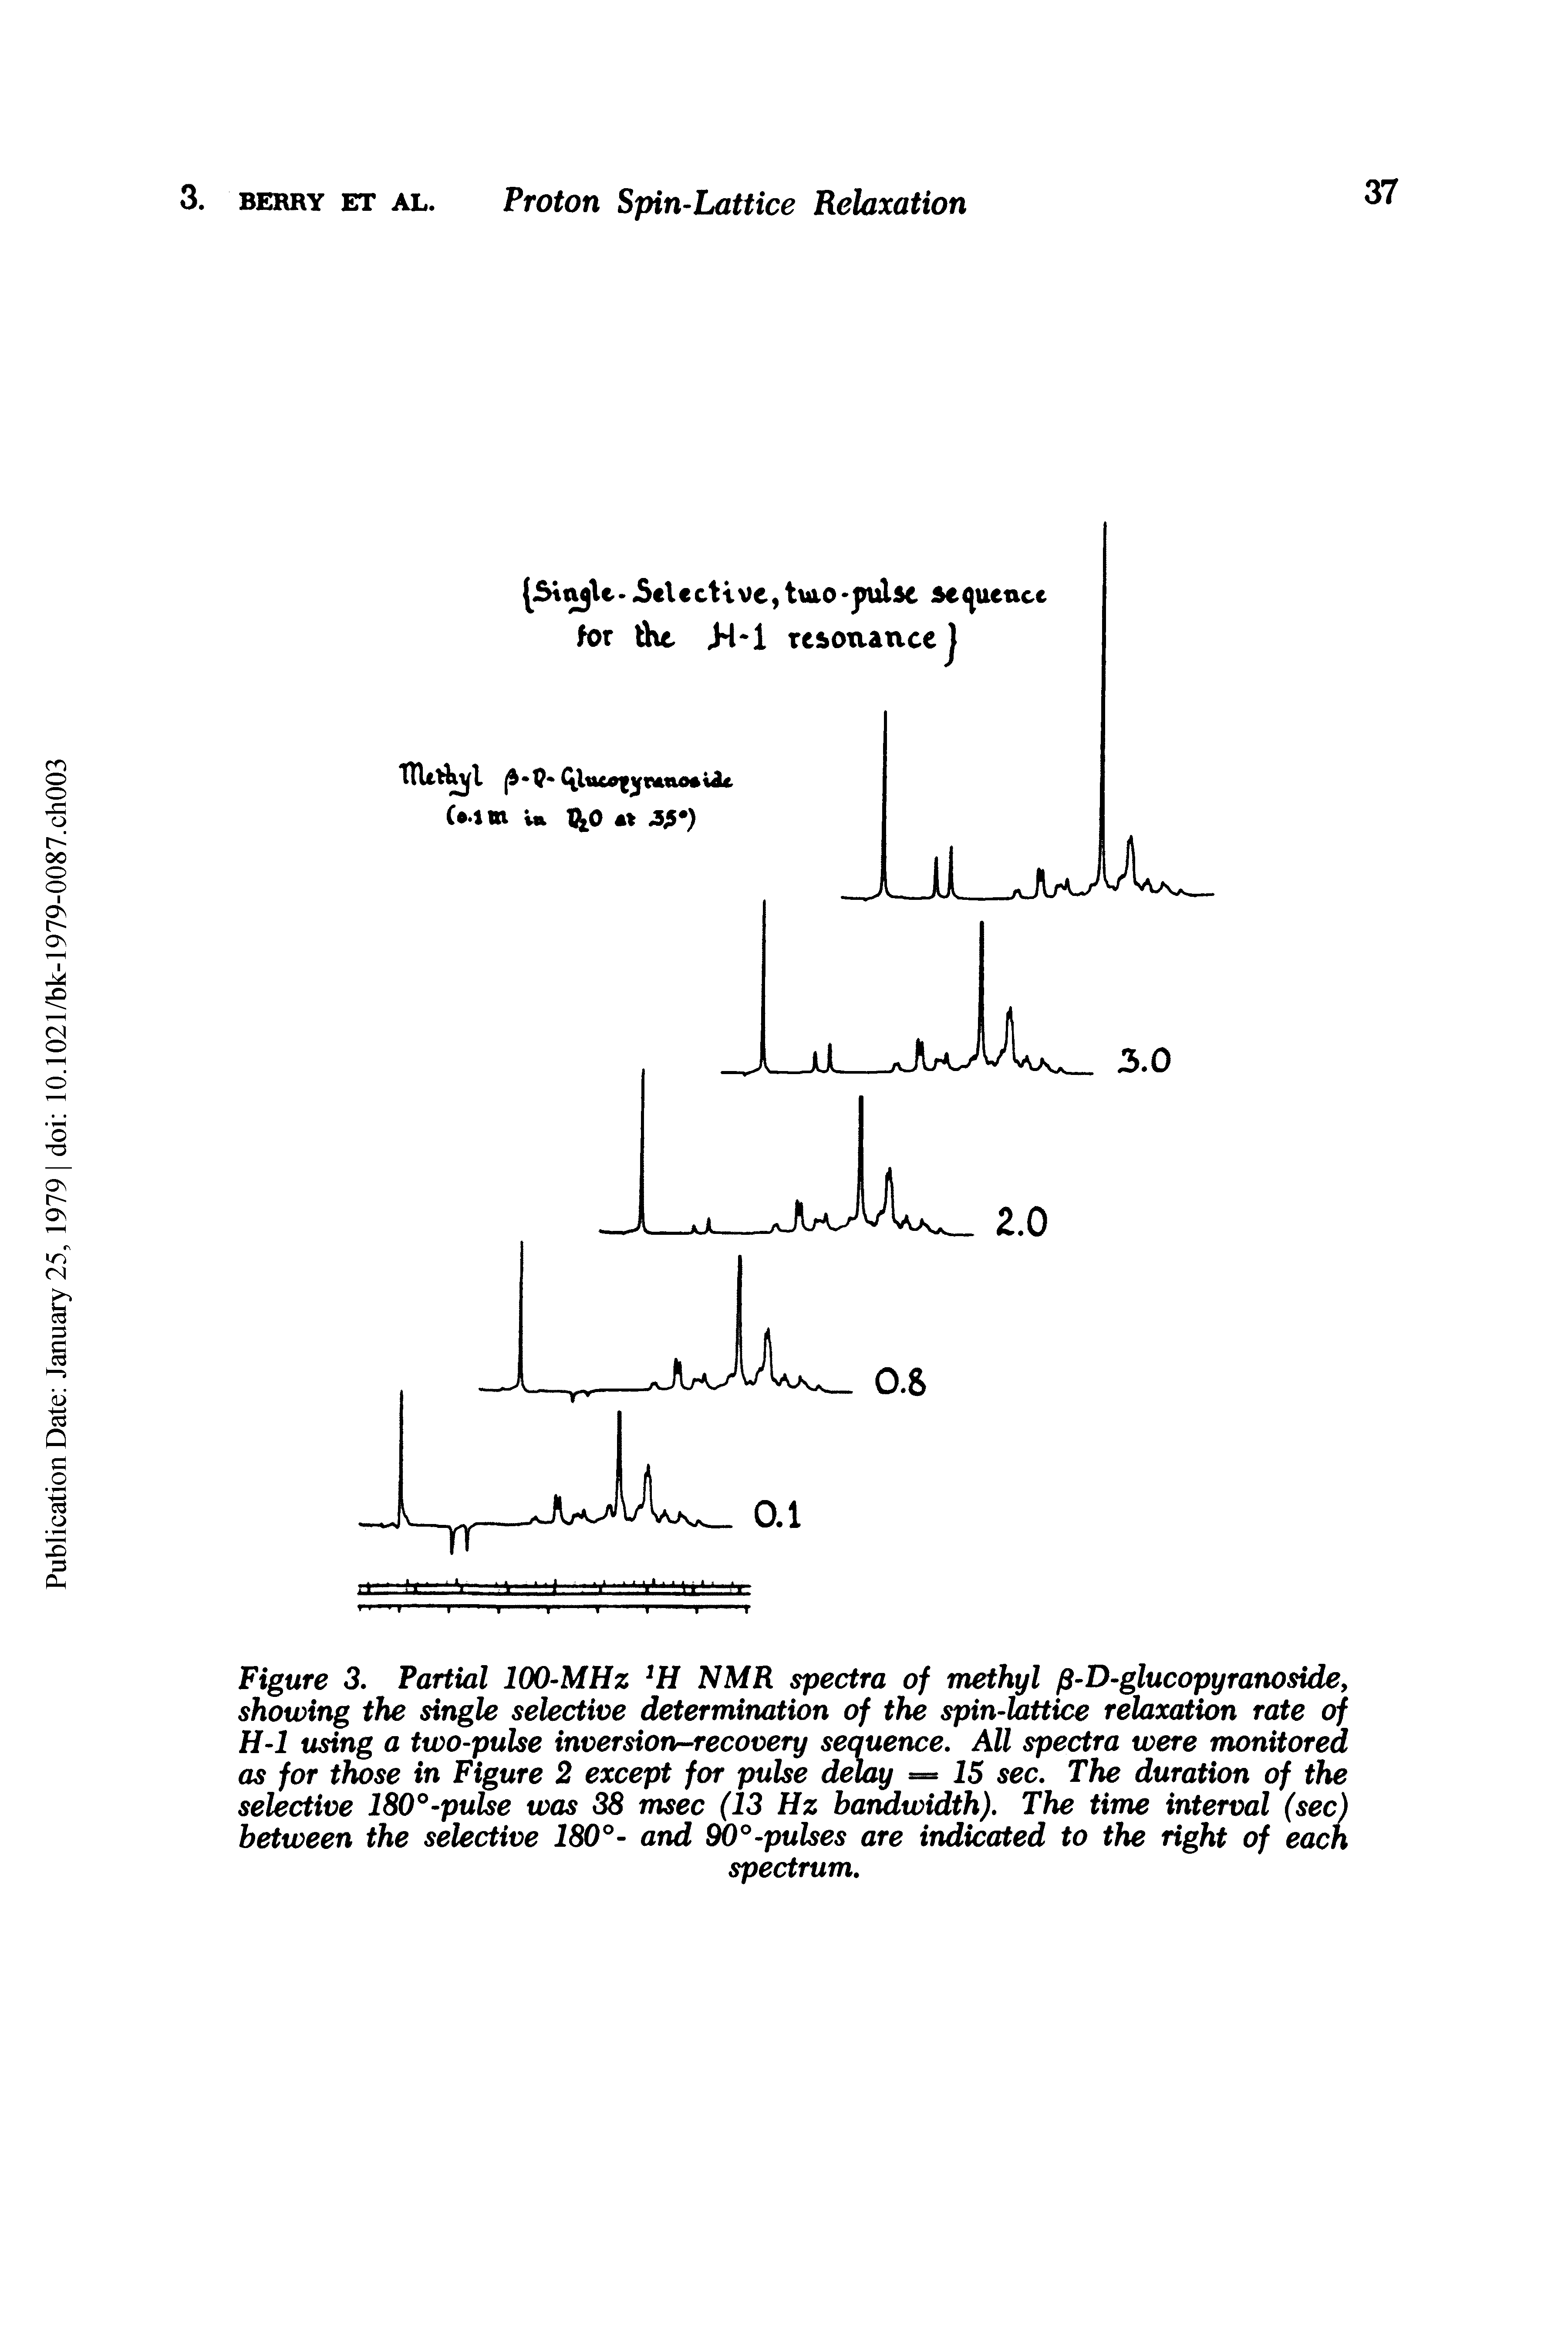 Figure 3. Partial 100-MHz 2H NMR spectra of methyl p-D-glucopyranoside, showing the single selective determination of the spin-lattice relaxation rate of H-l using a two-pulse inversion recovery sequence. All spectra were monitored as for those in Figure 2 except for pulse delay — 25 sec. The duration of the selective 180°-pulse was 38 msec (13 Hz bandwidth). The time interval (sec) between the selective 180°- and 90° -pulses are indicated to the right of each...